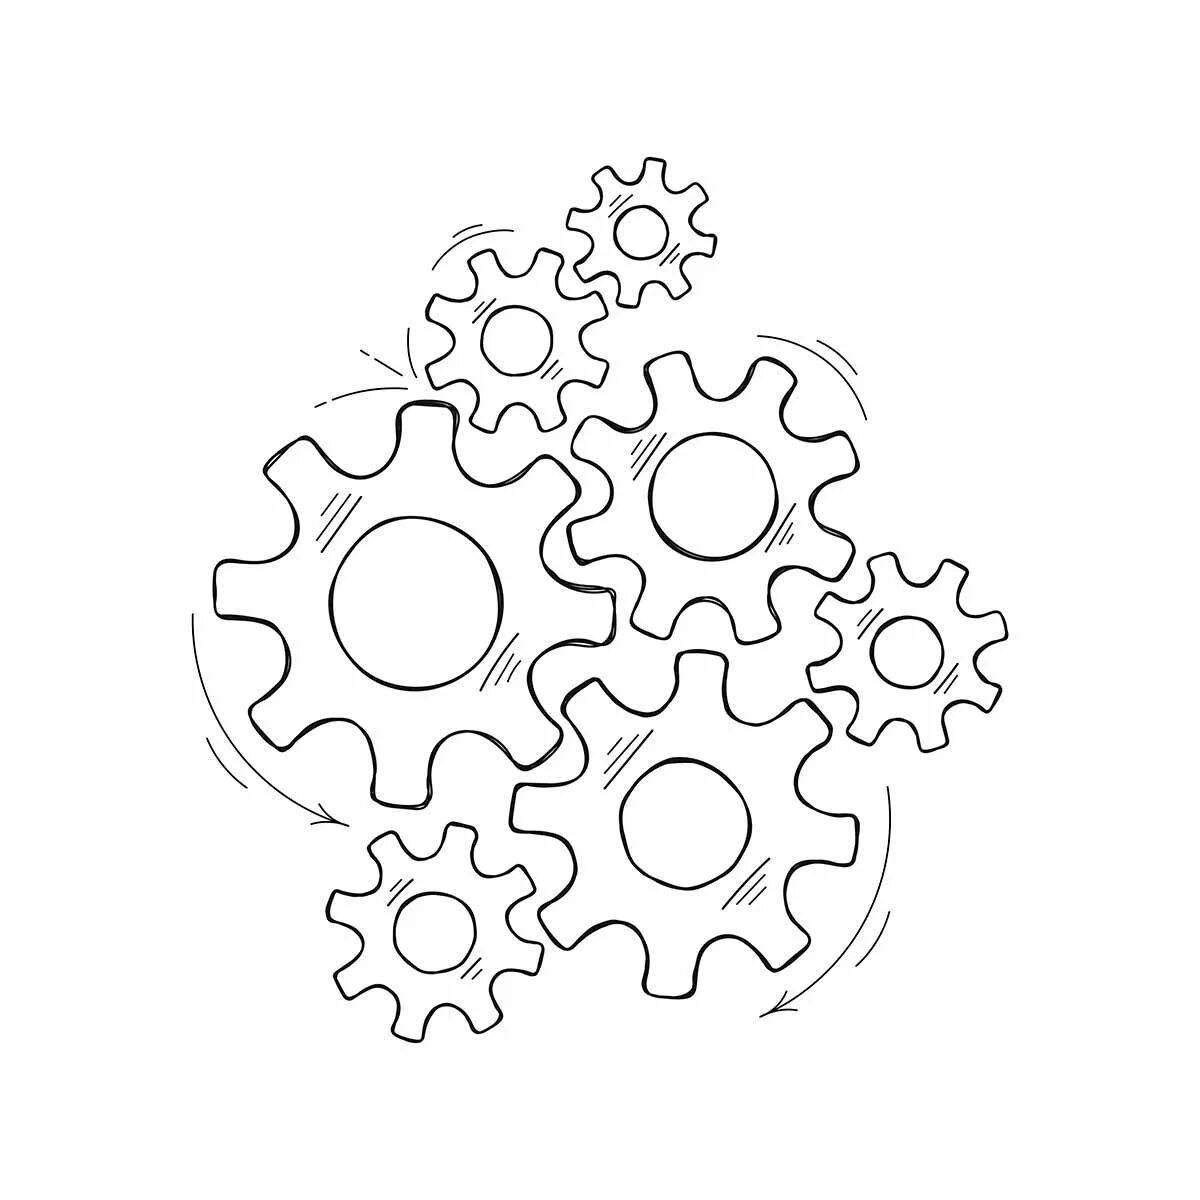 Detailed gears coloring page for kids